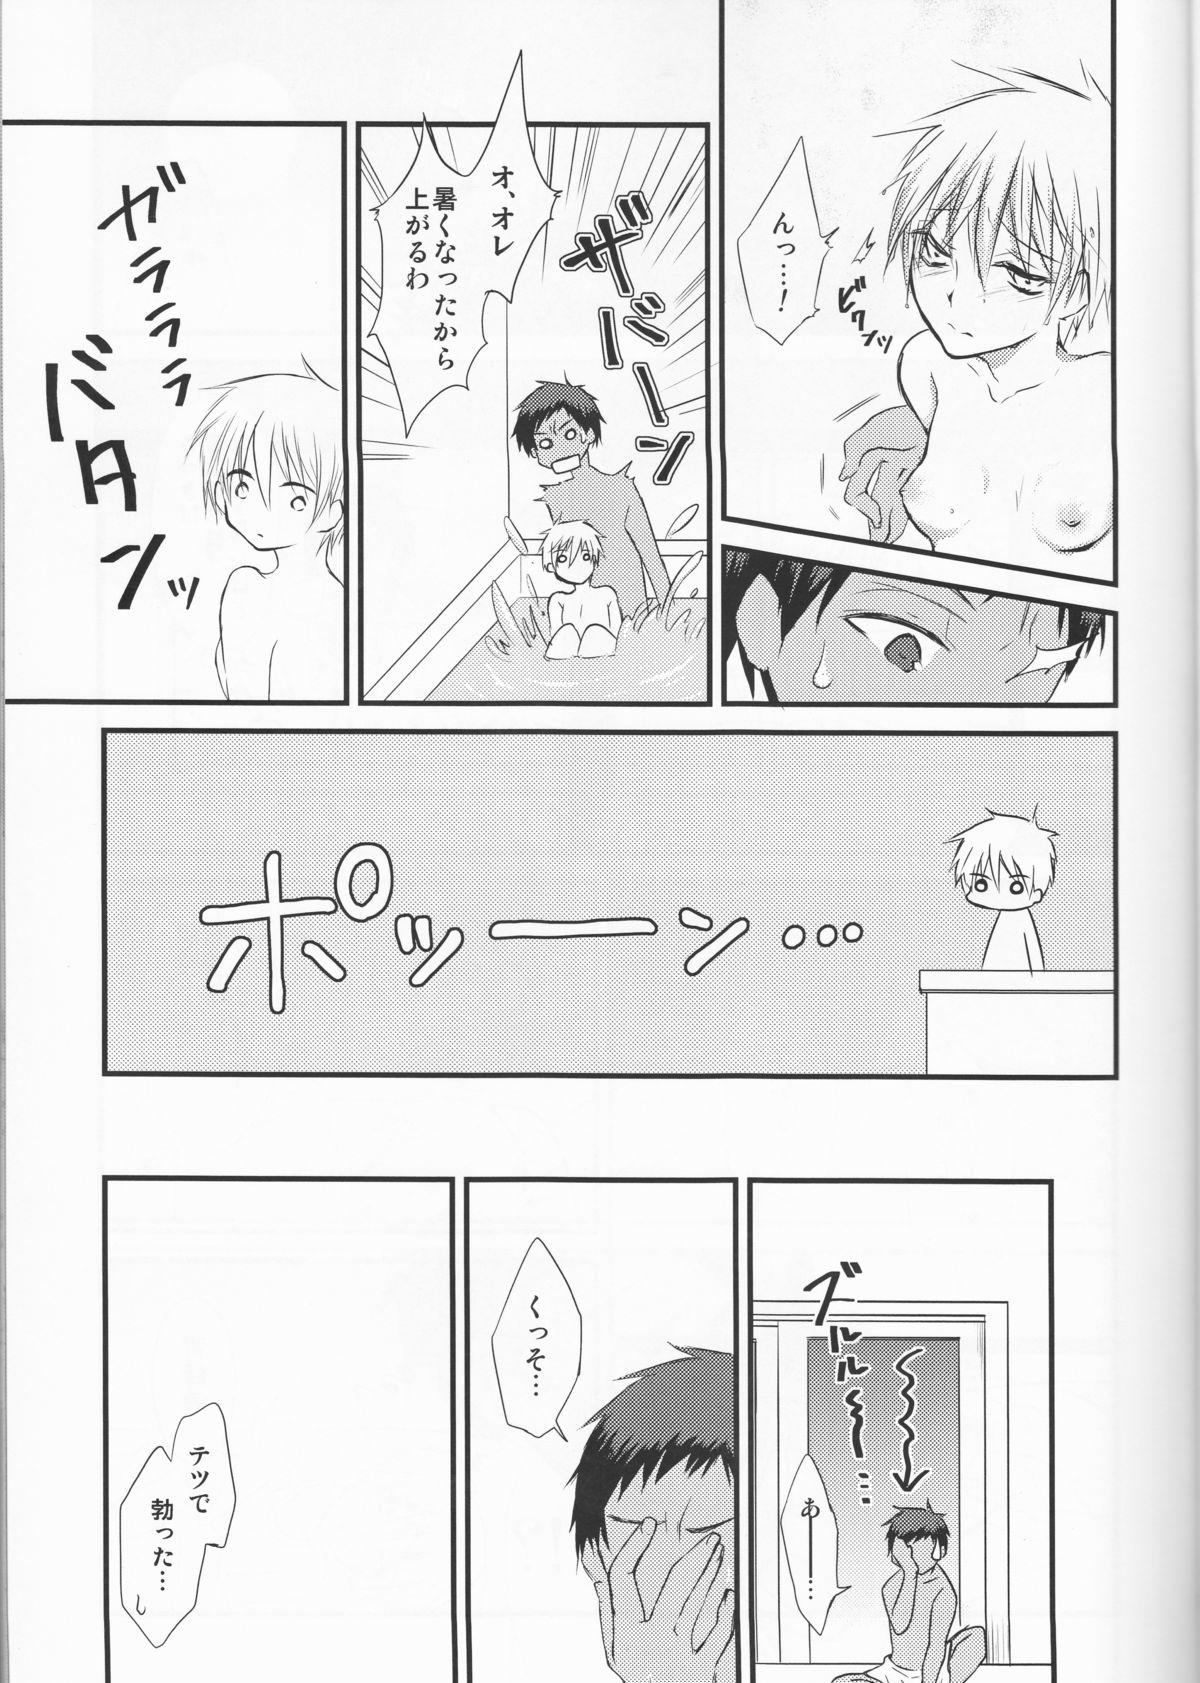 Penis Yesterday of his and her tomorrow - Kuroko no basuke Public Sex - Page 11